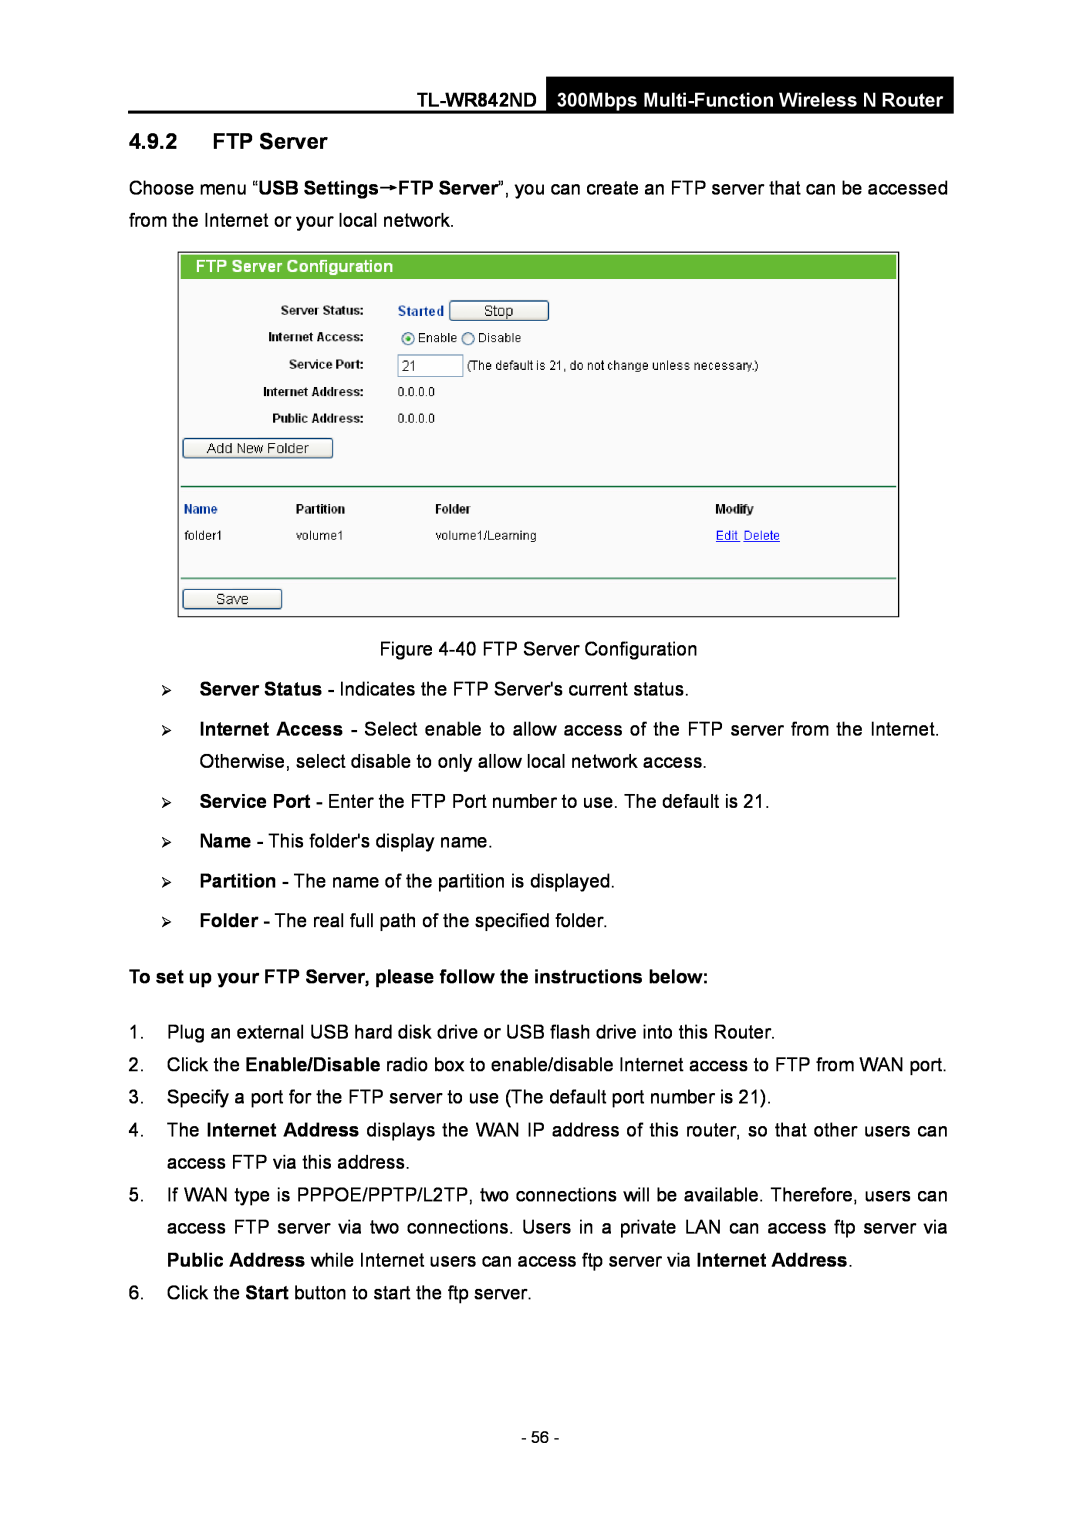 TP-Link WR-842ND manual To set up your FTP Server, please follow the instructions below 